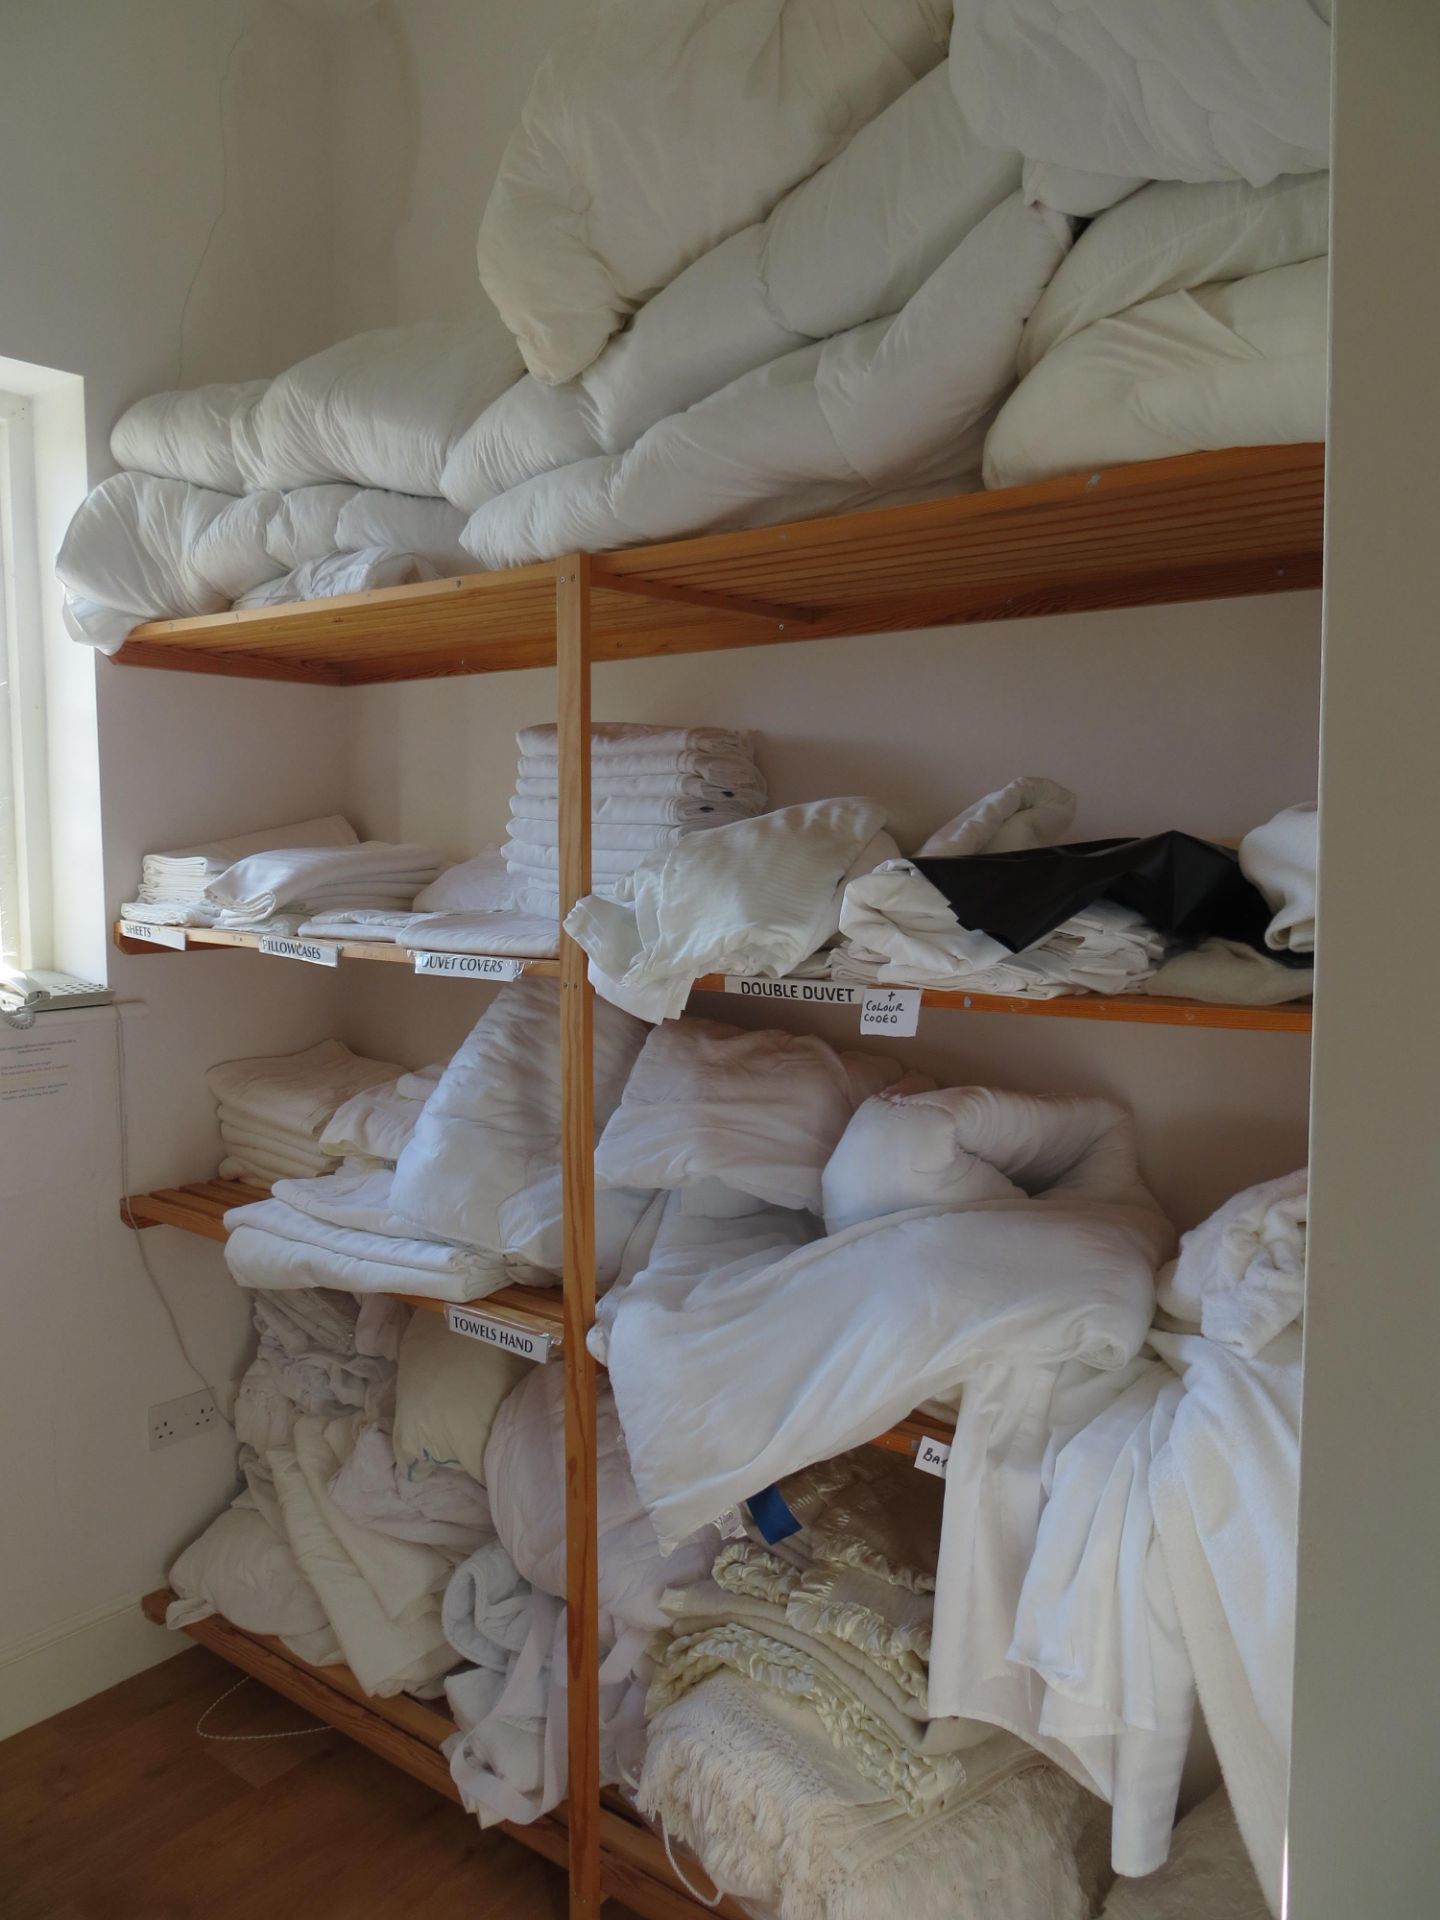 Contents of linen room to include duvets, bed sheets, towels, blankets & toiletries as lotted